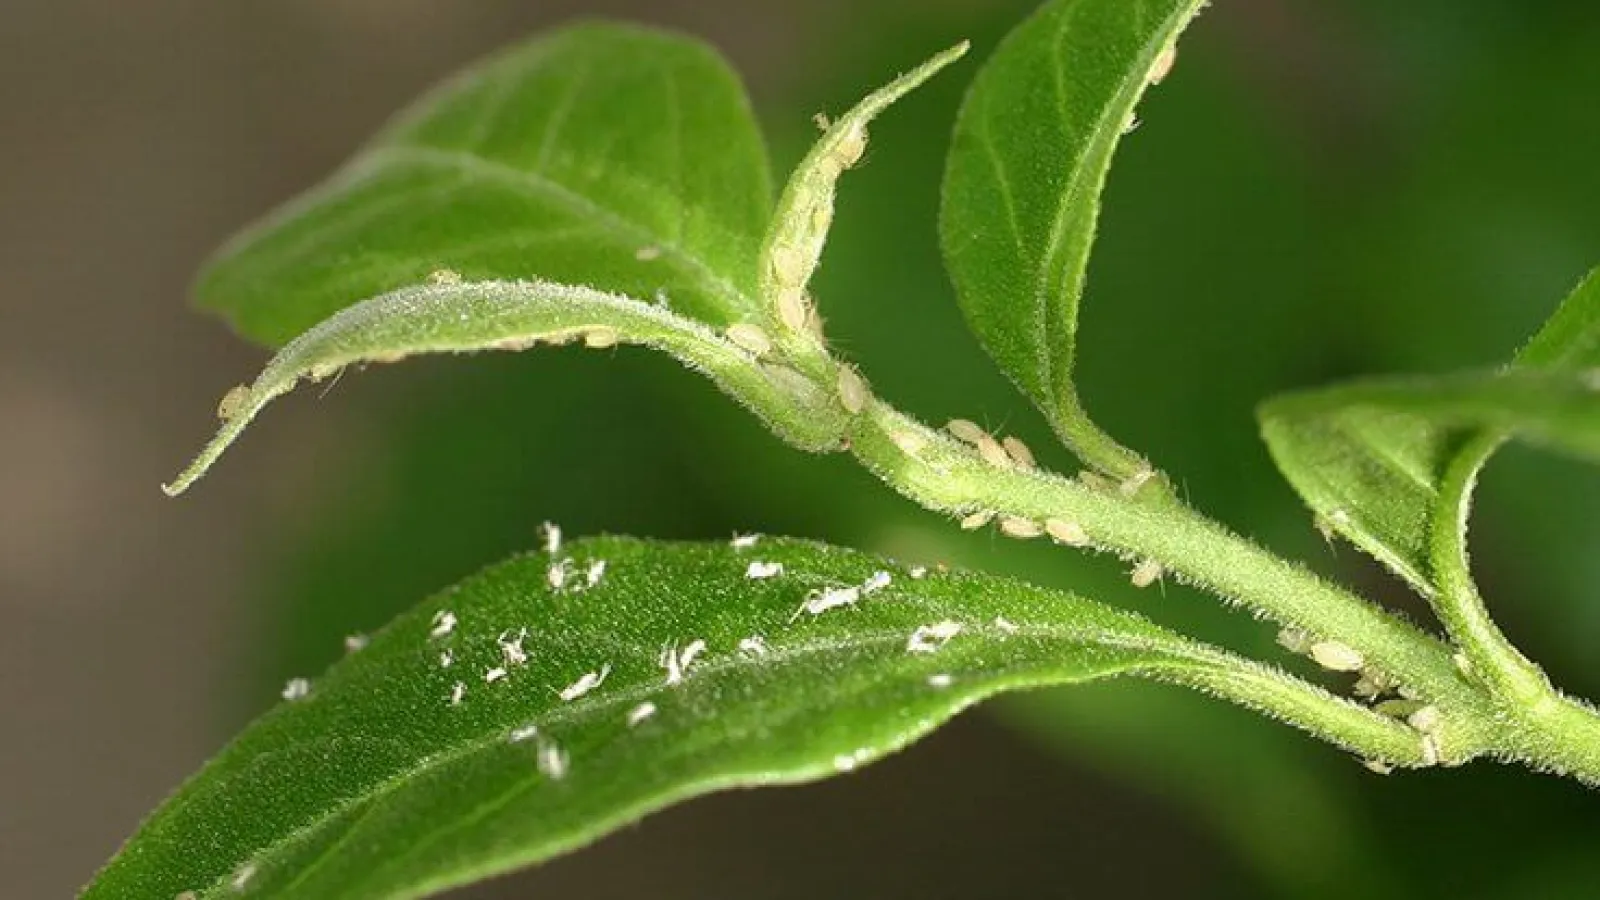 Common Shrub Insects: Aphids & Lace Bugs